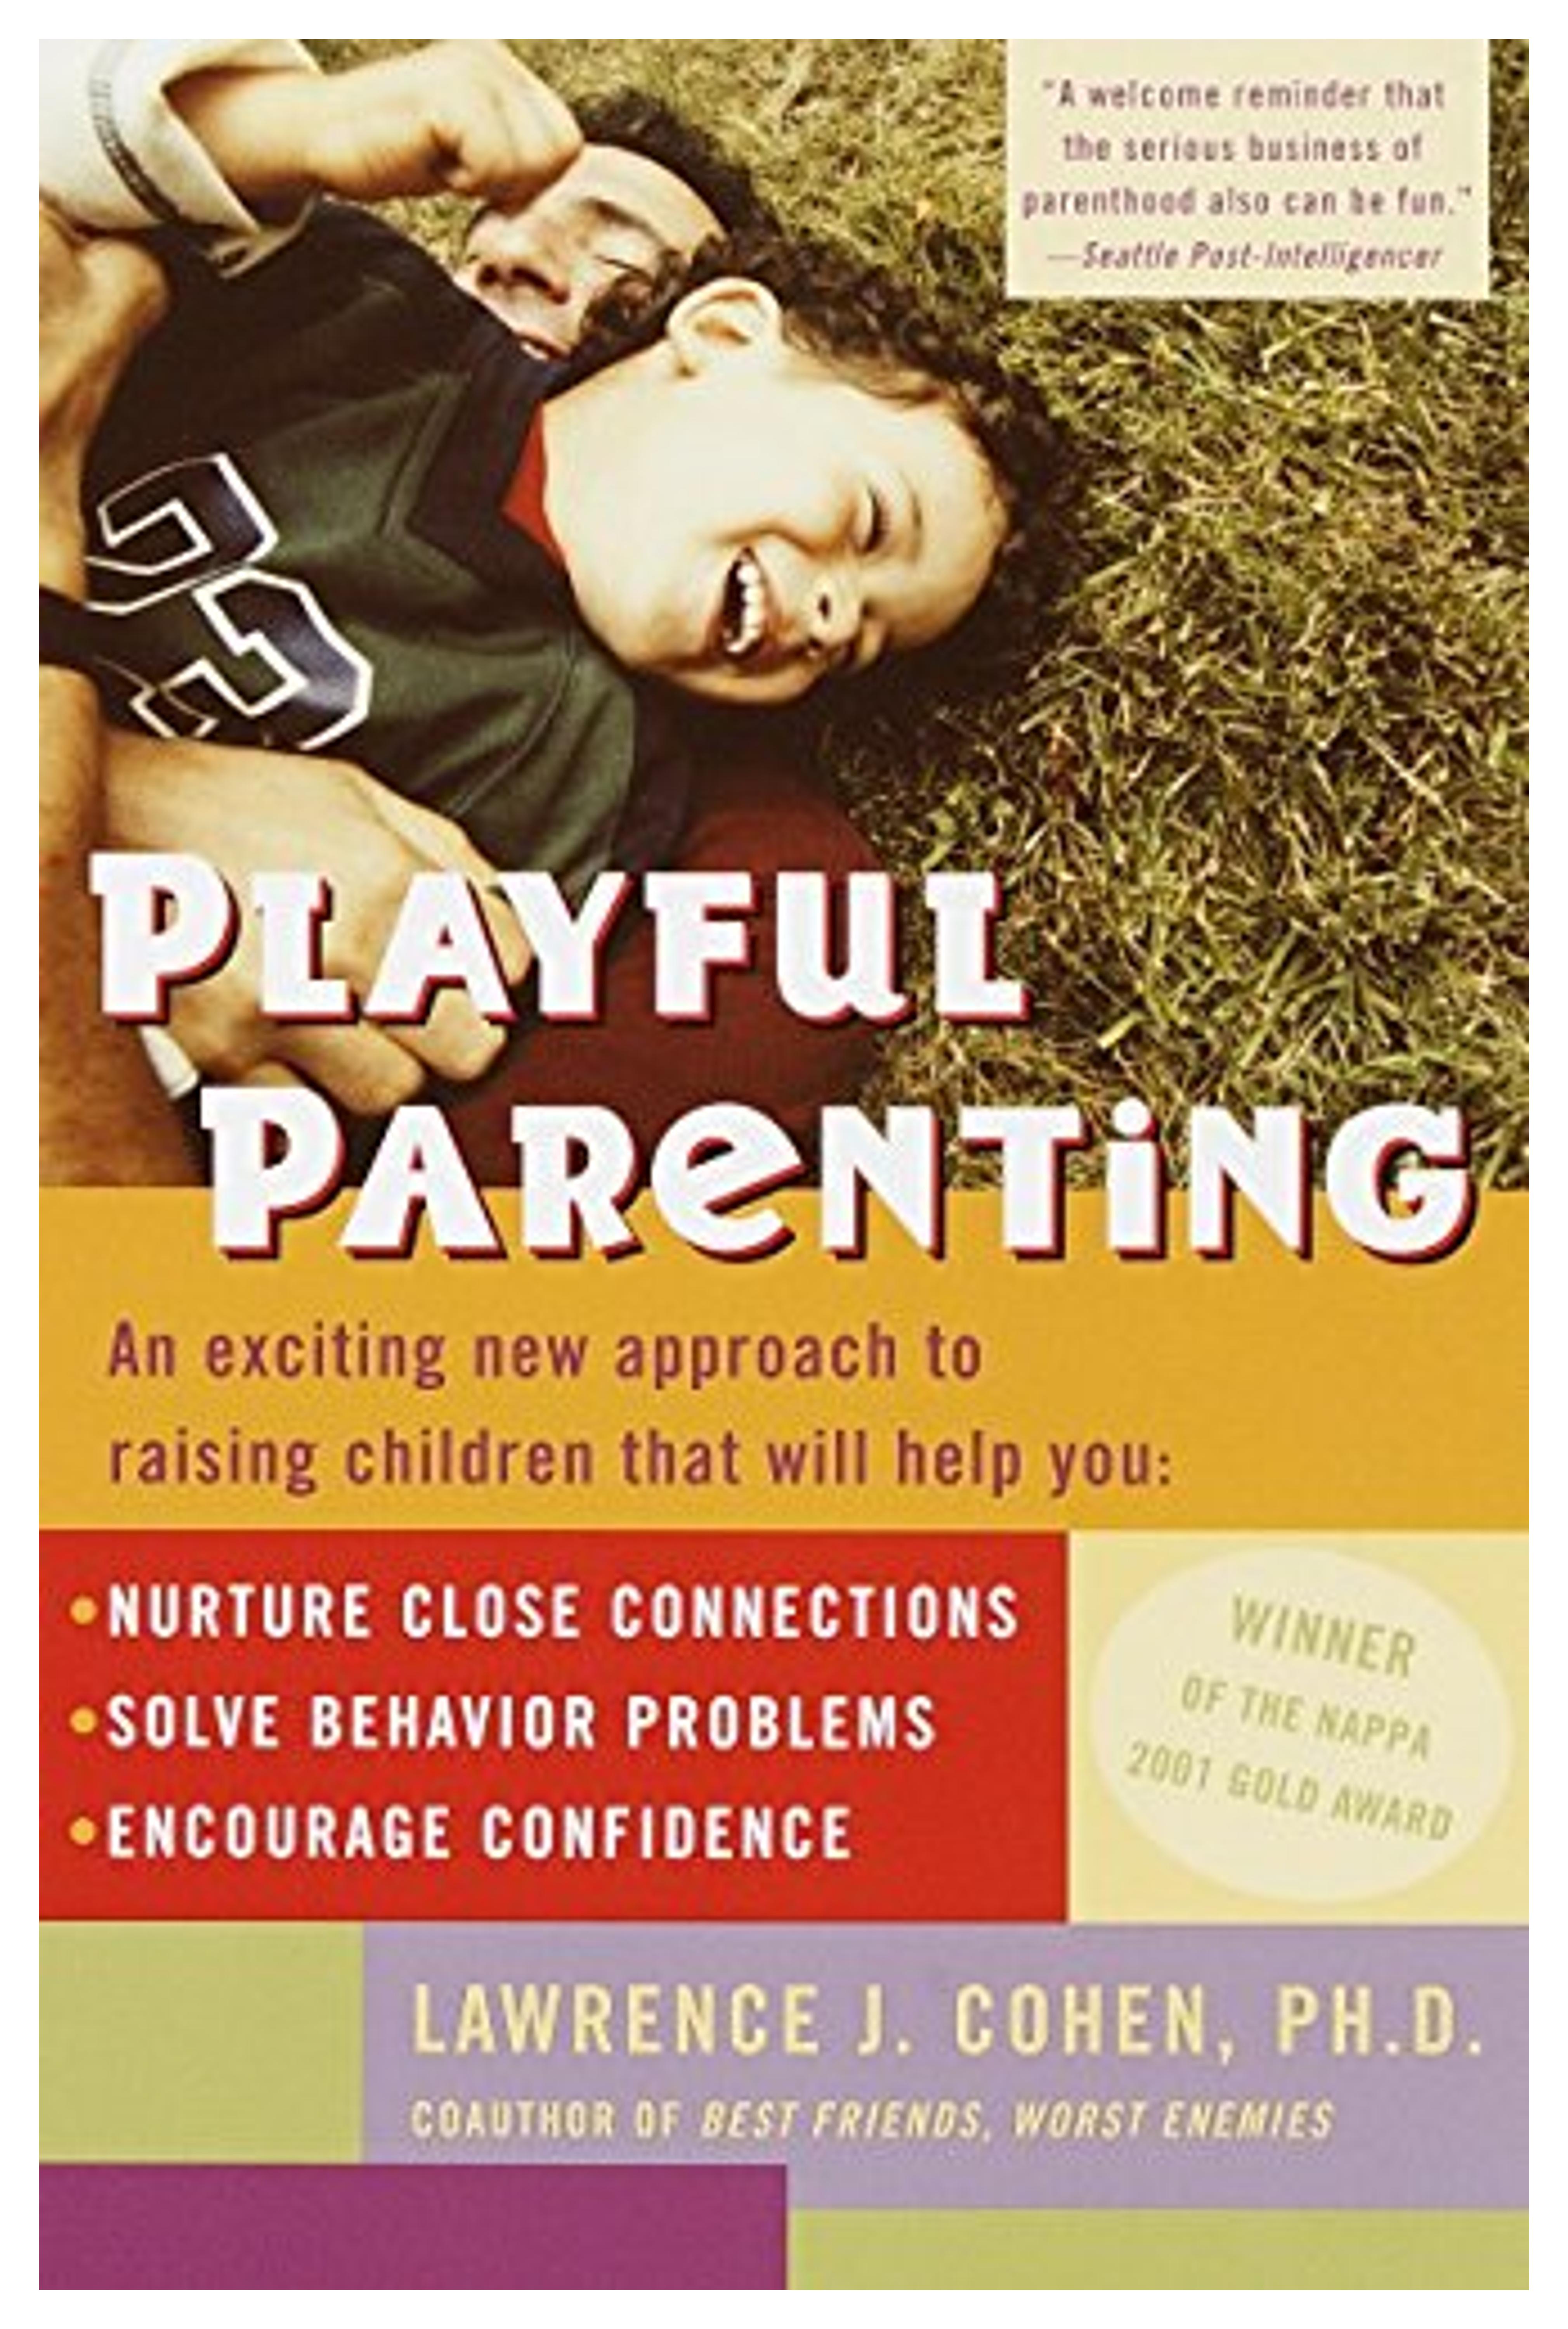 Playful Parenting: An Exciting New Approach to Raising Children That Will Help You Nurture Close Connections, Solve Behavior Problems, and Encourage Confidence